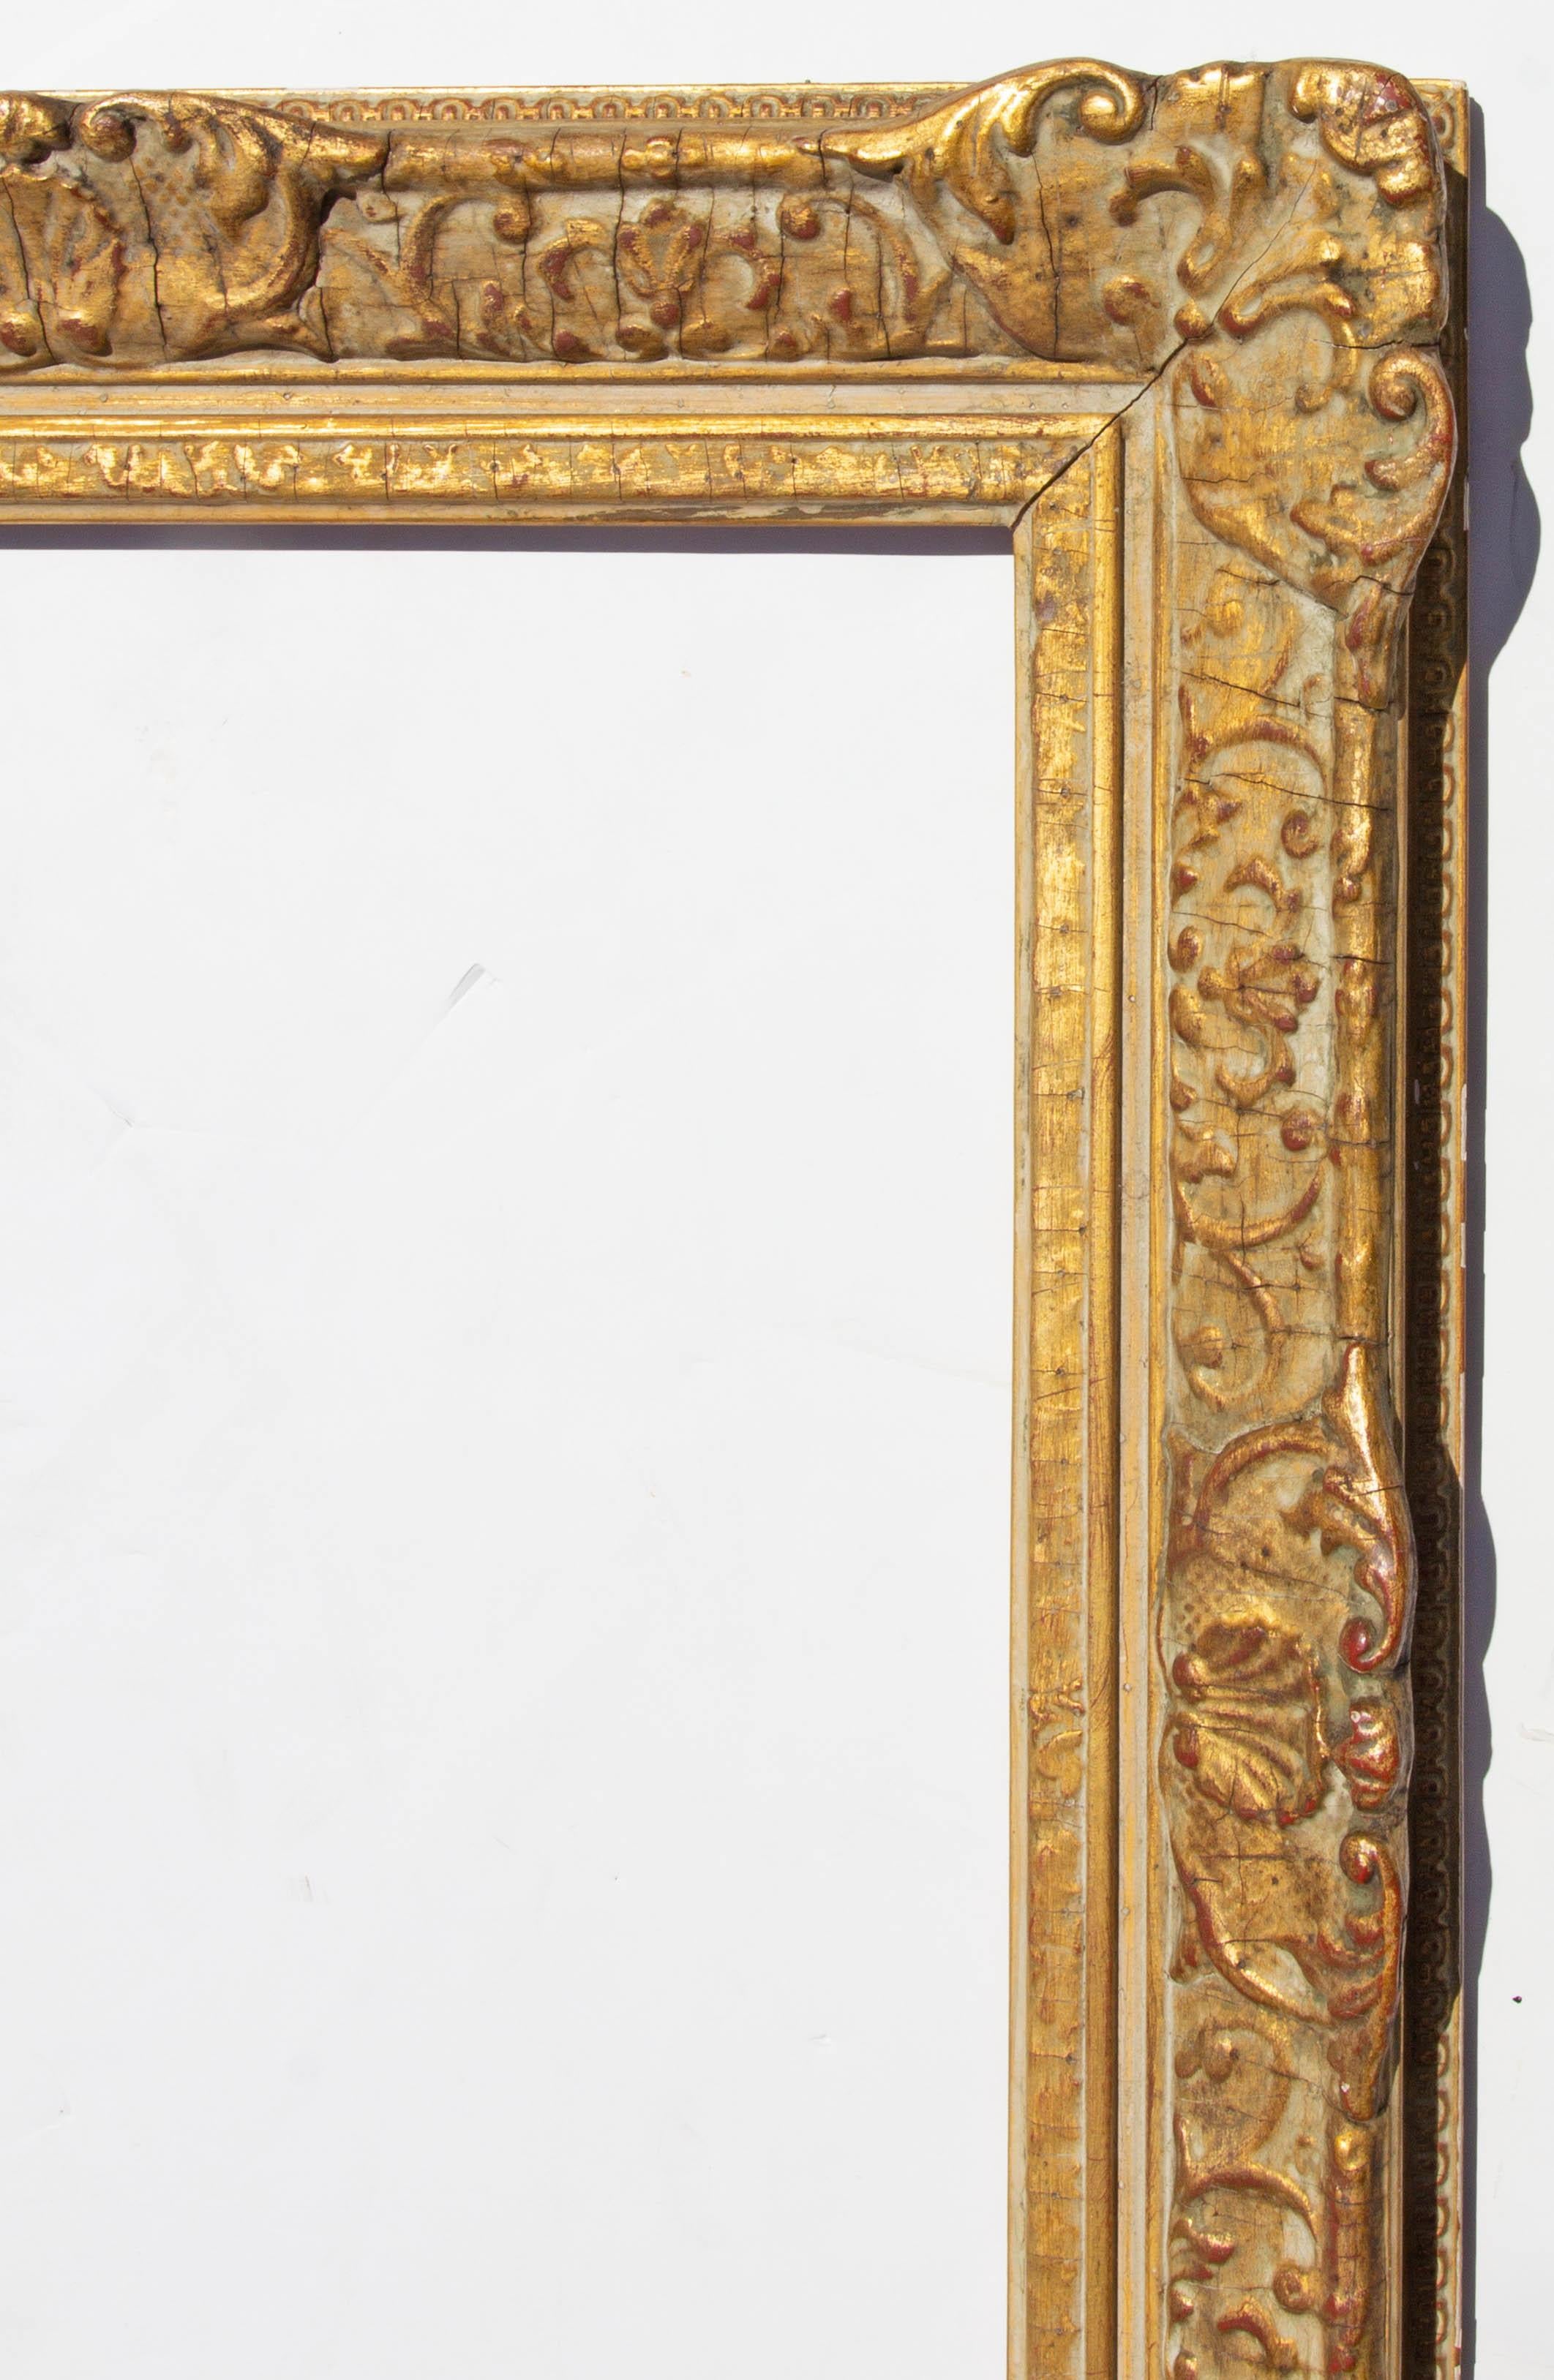 French impressionist style picture frame by Newcomb Macklin. Antique gilt finish. Rabbet measures 21 7/8